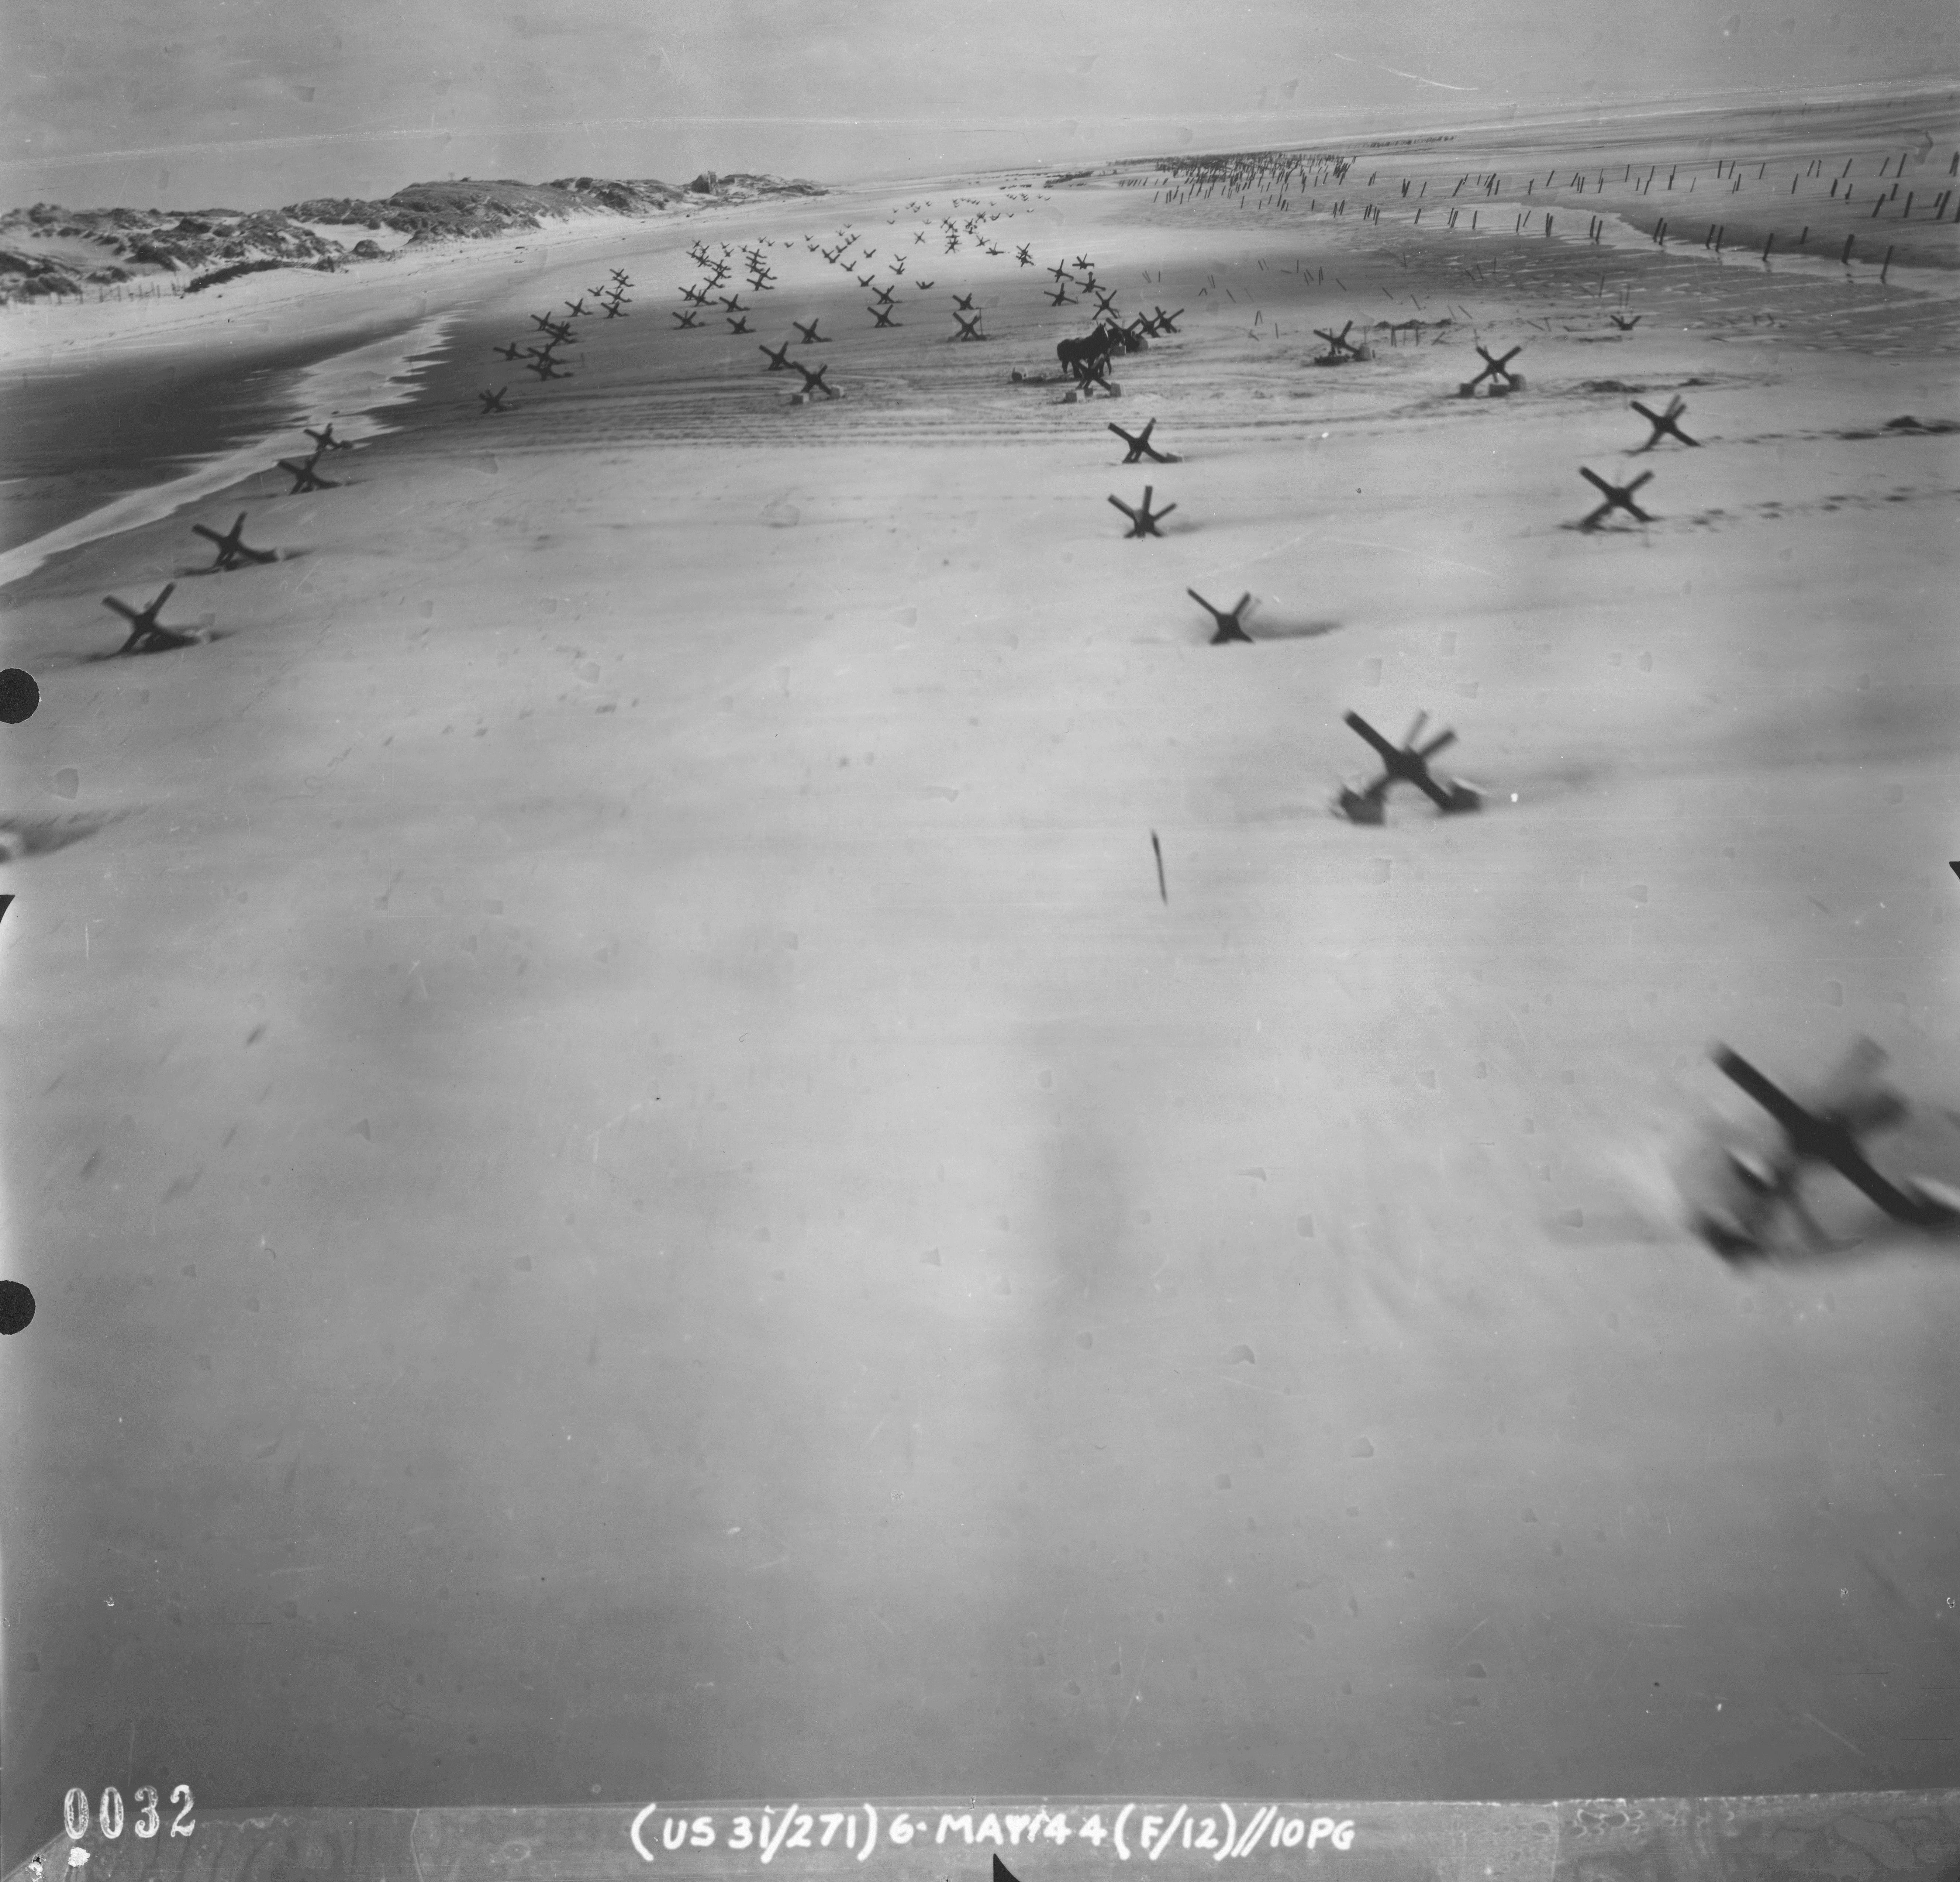 Normandy beach defenses, France, 6 May 1944, photo 2 of 4